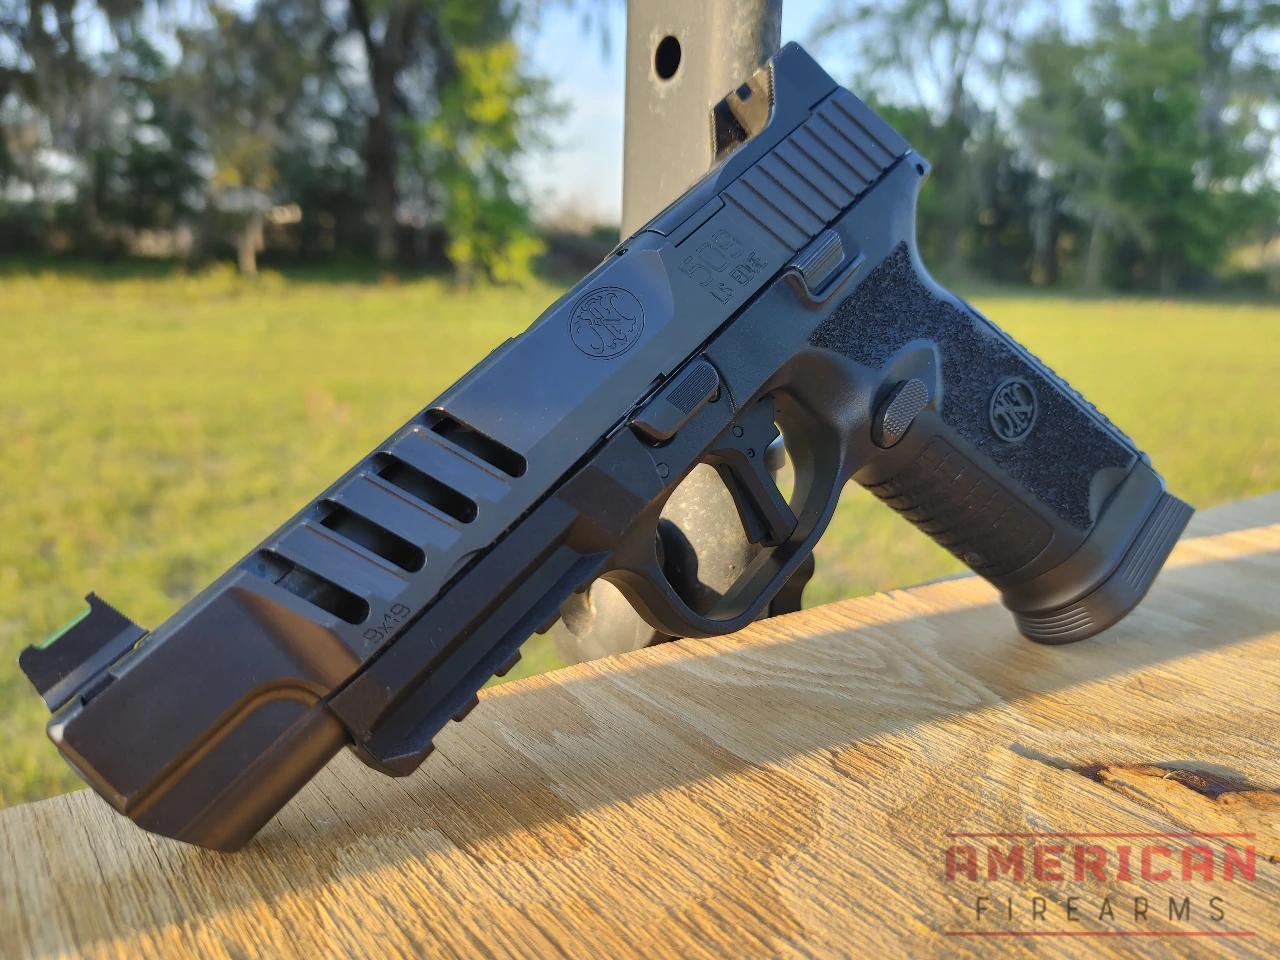 The LS Edge is a fantastic pistol for competition shooters or home defense, but probably too large for carry use.